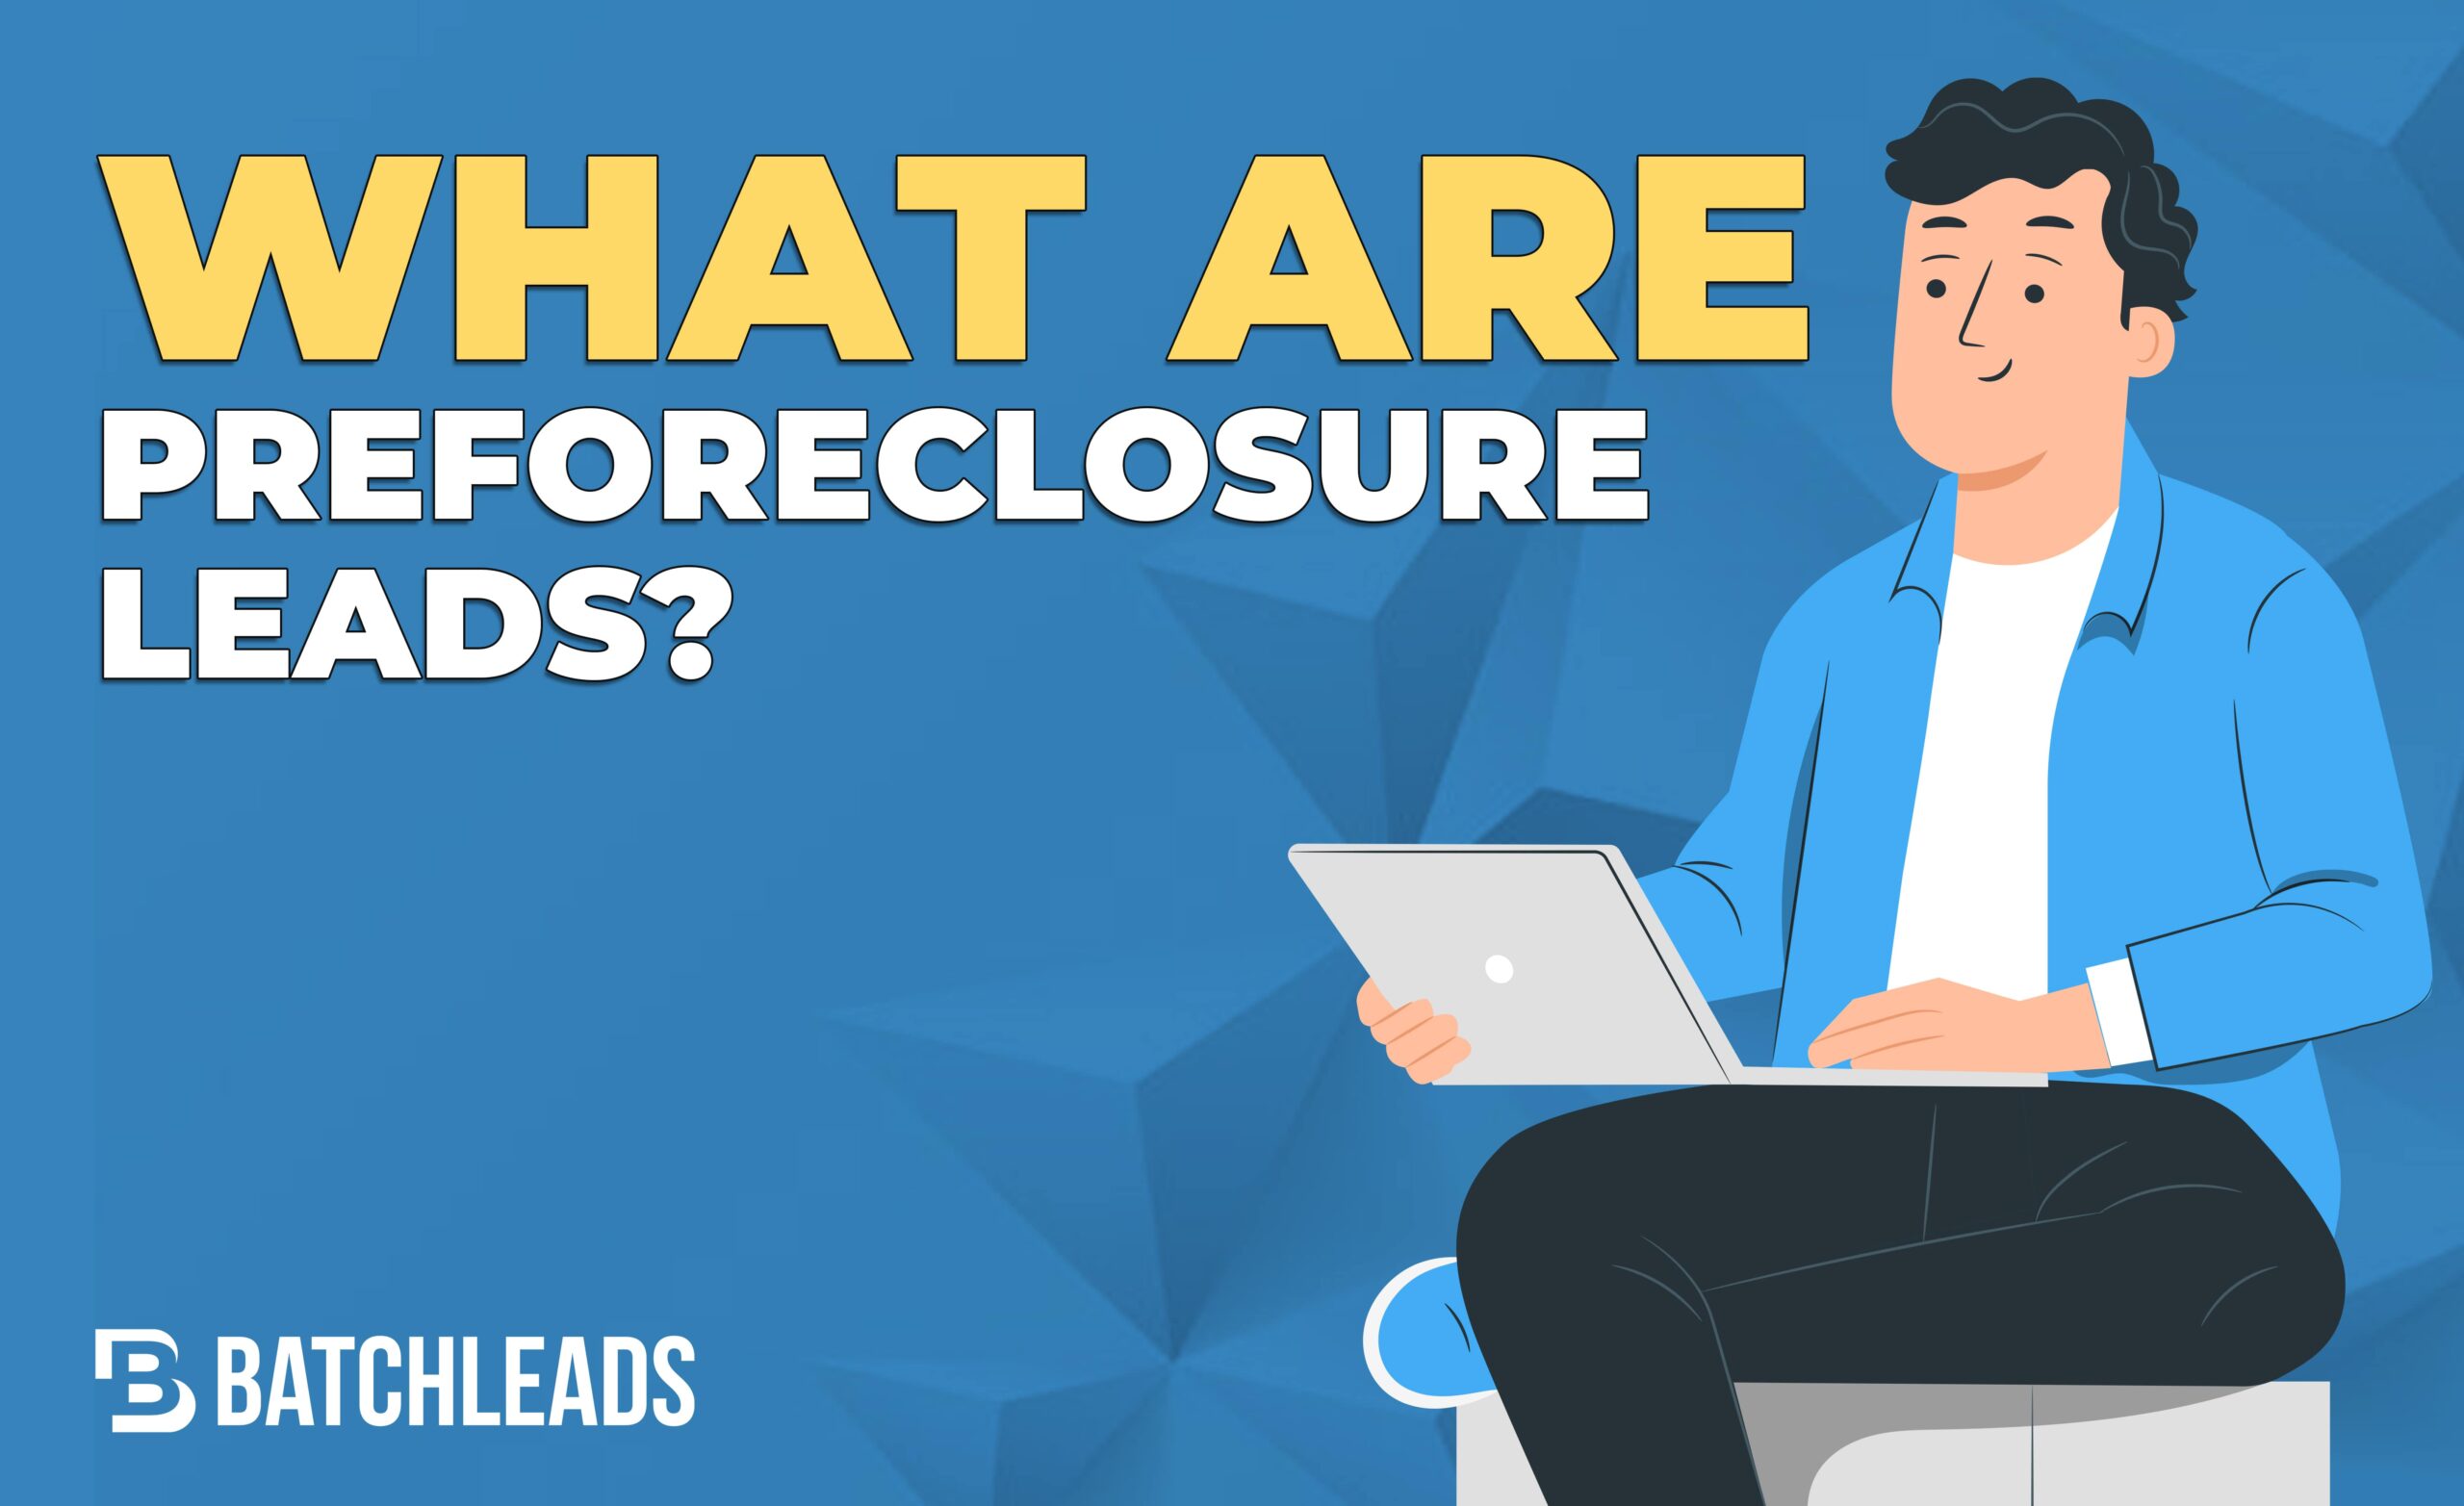 What Are Preforeclosure Leads